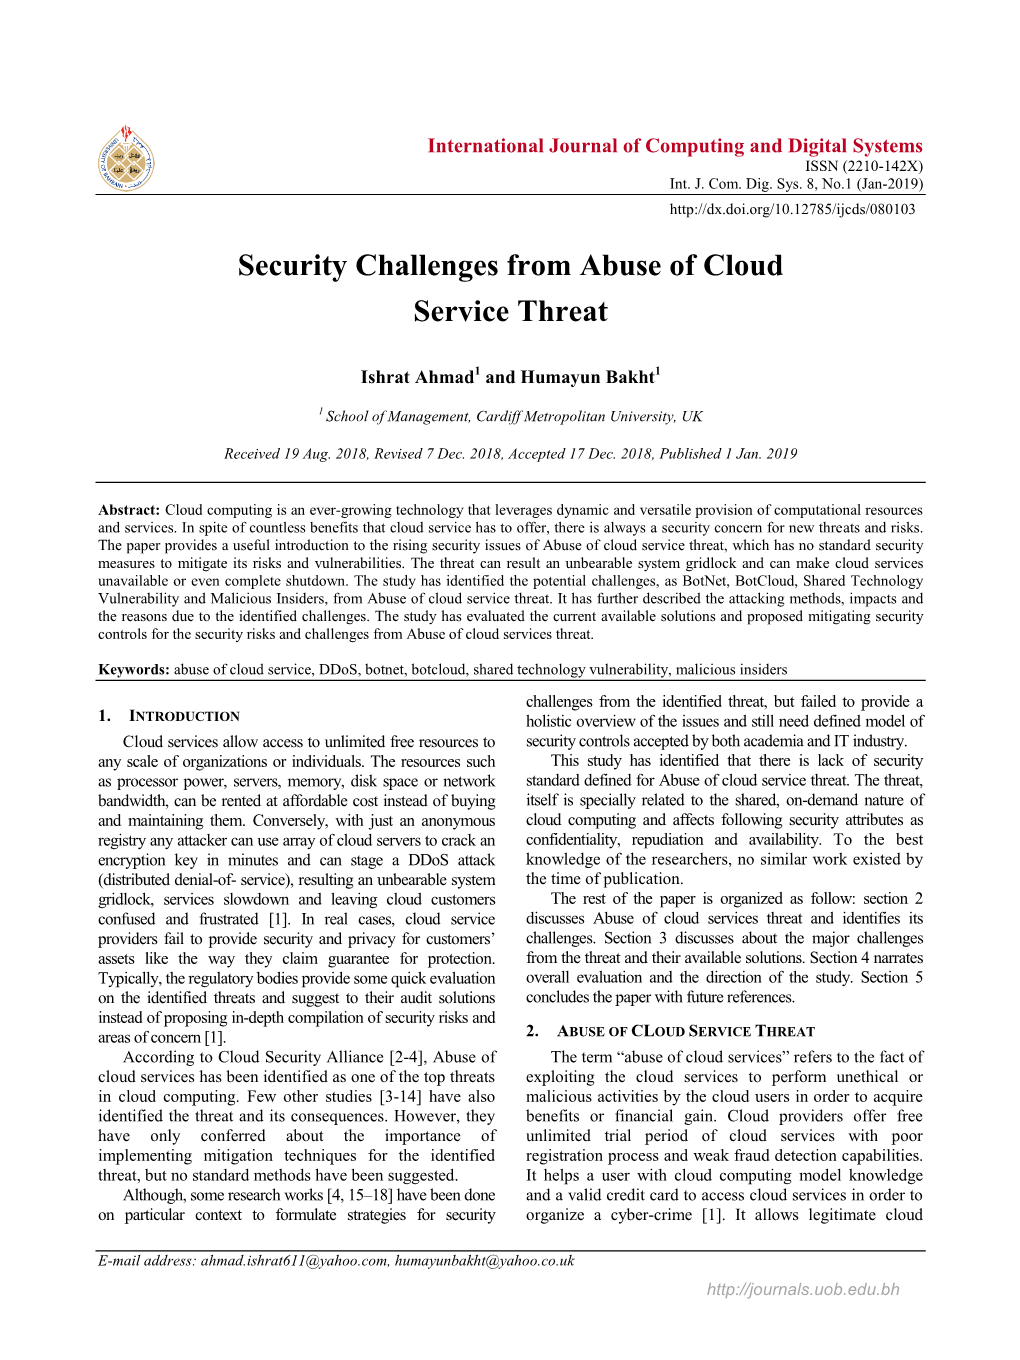 Security Challenges from Abuse of Cloud Service Threat